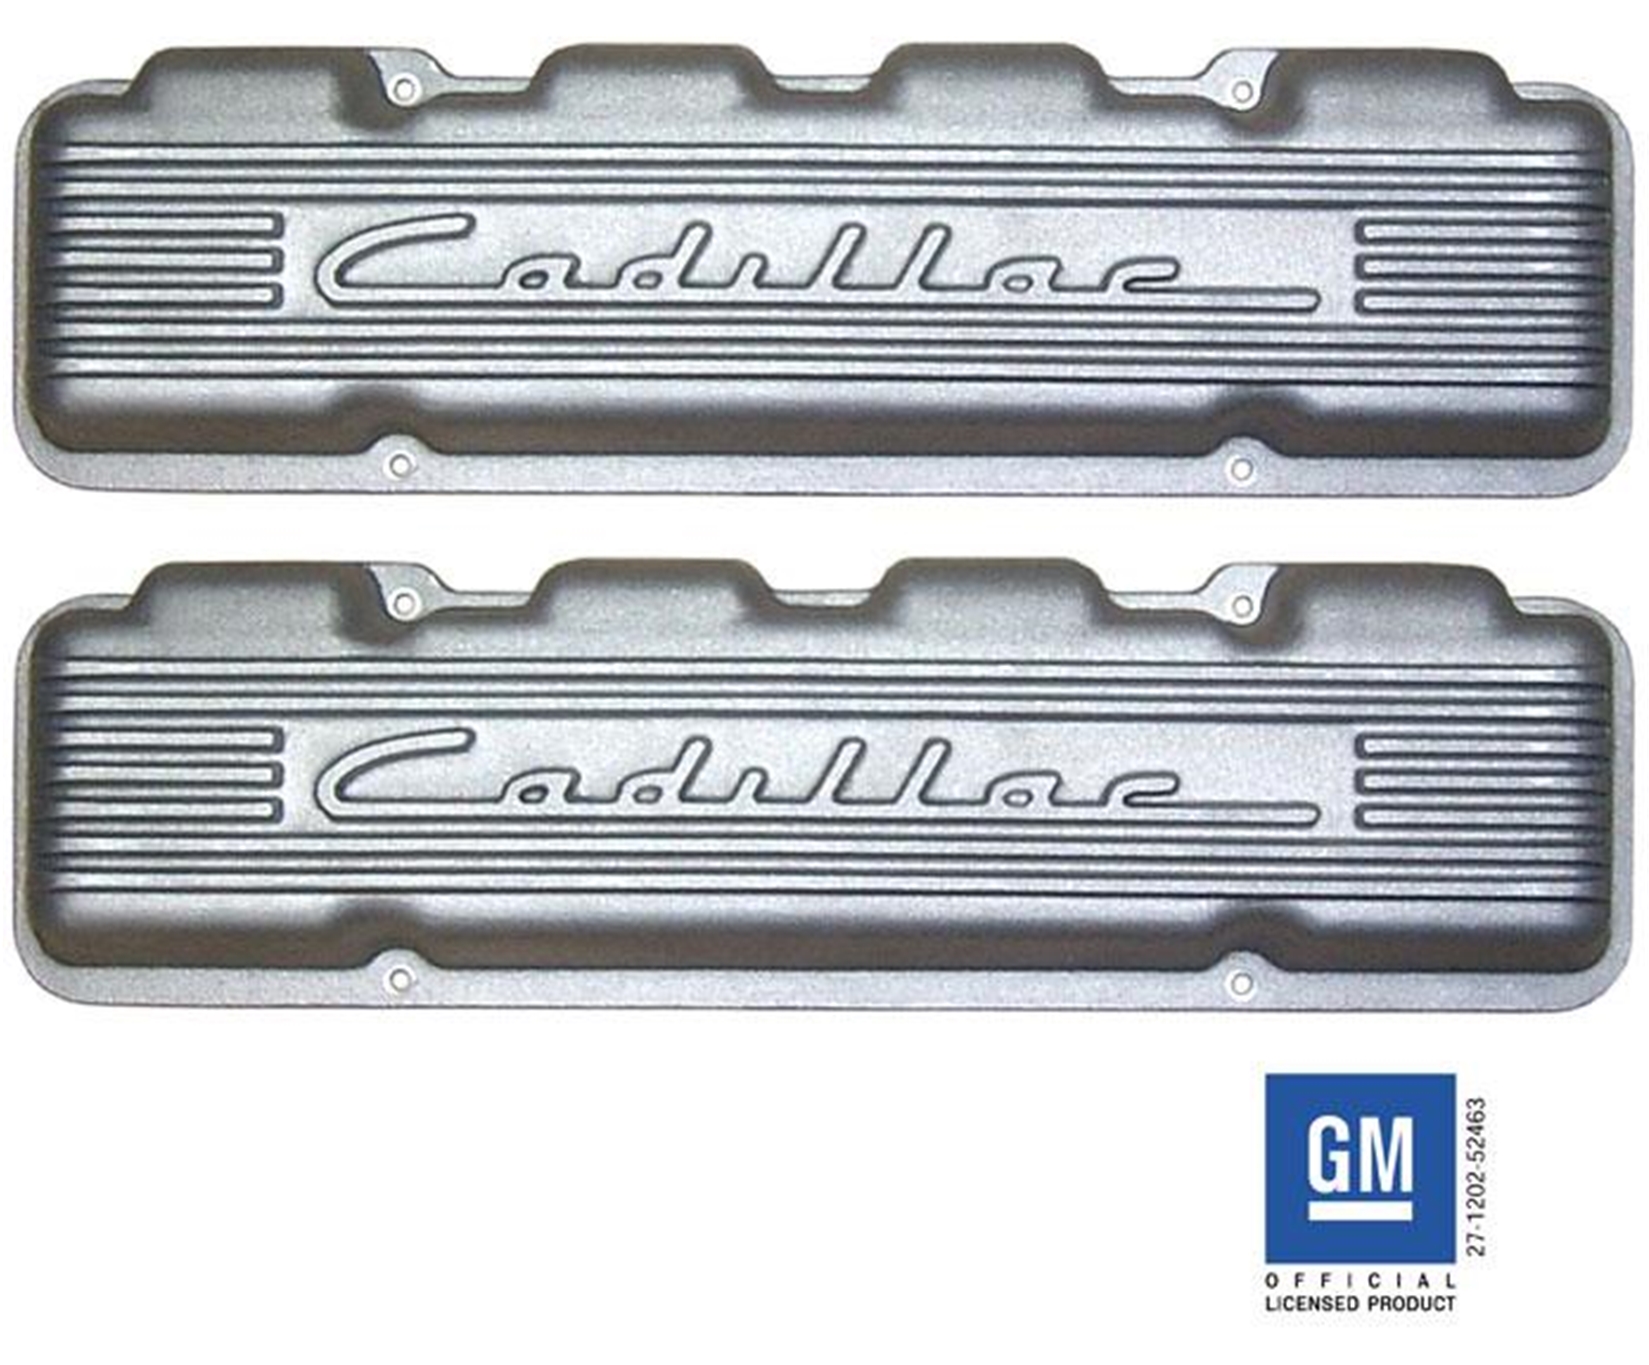 CADILLAC 331, 365, 390, 429 Valve Covers